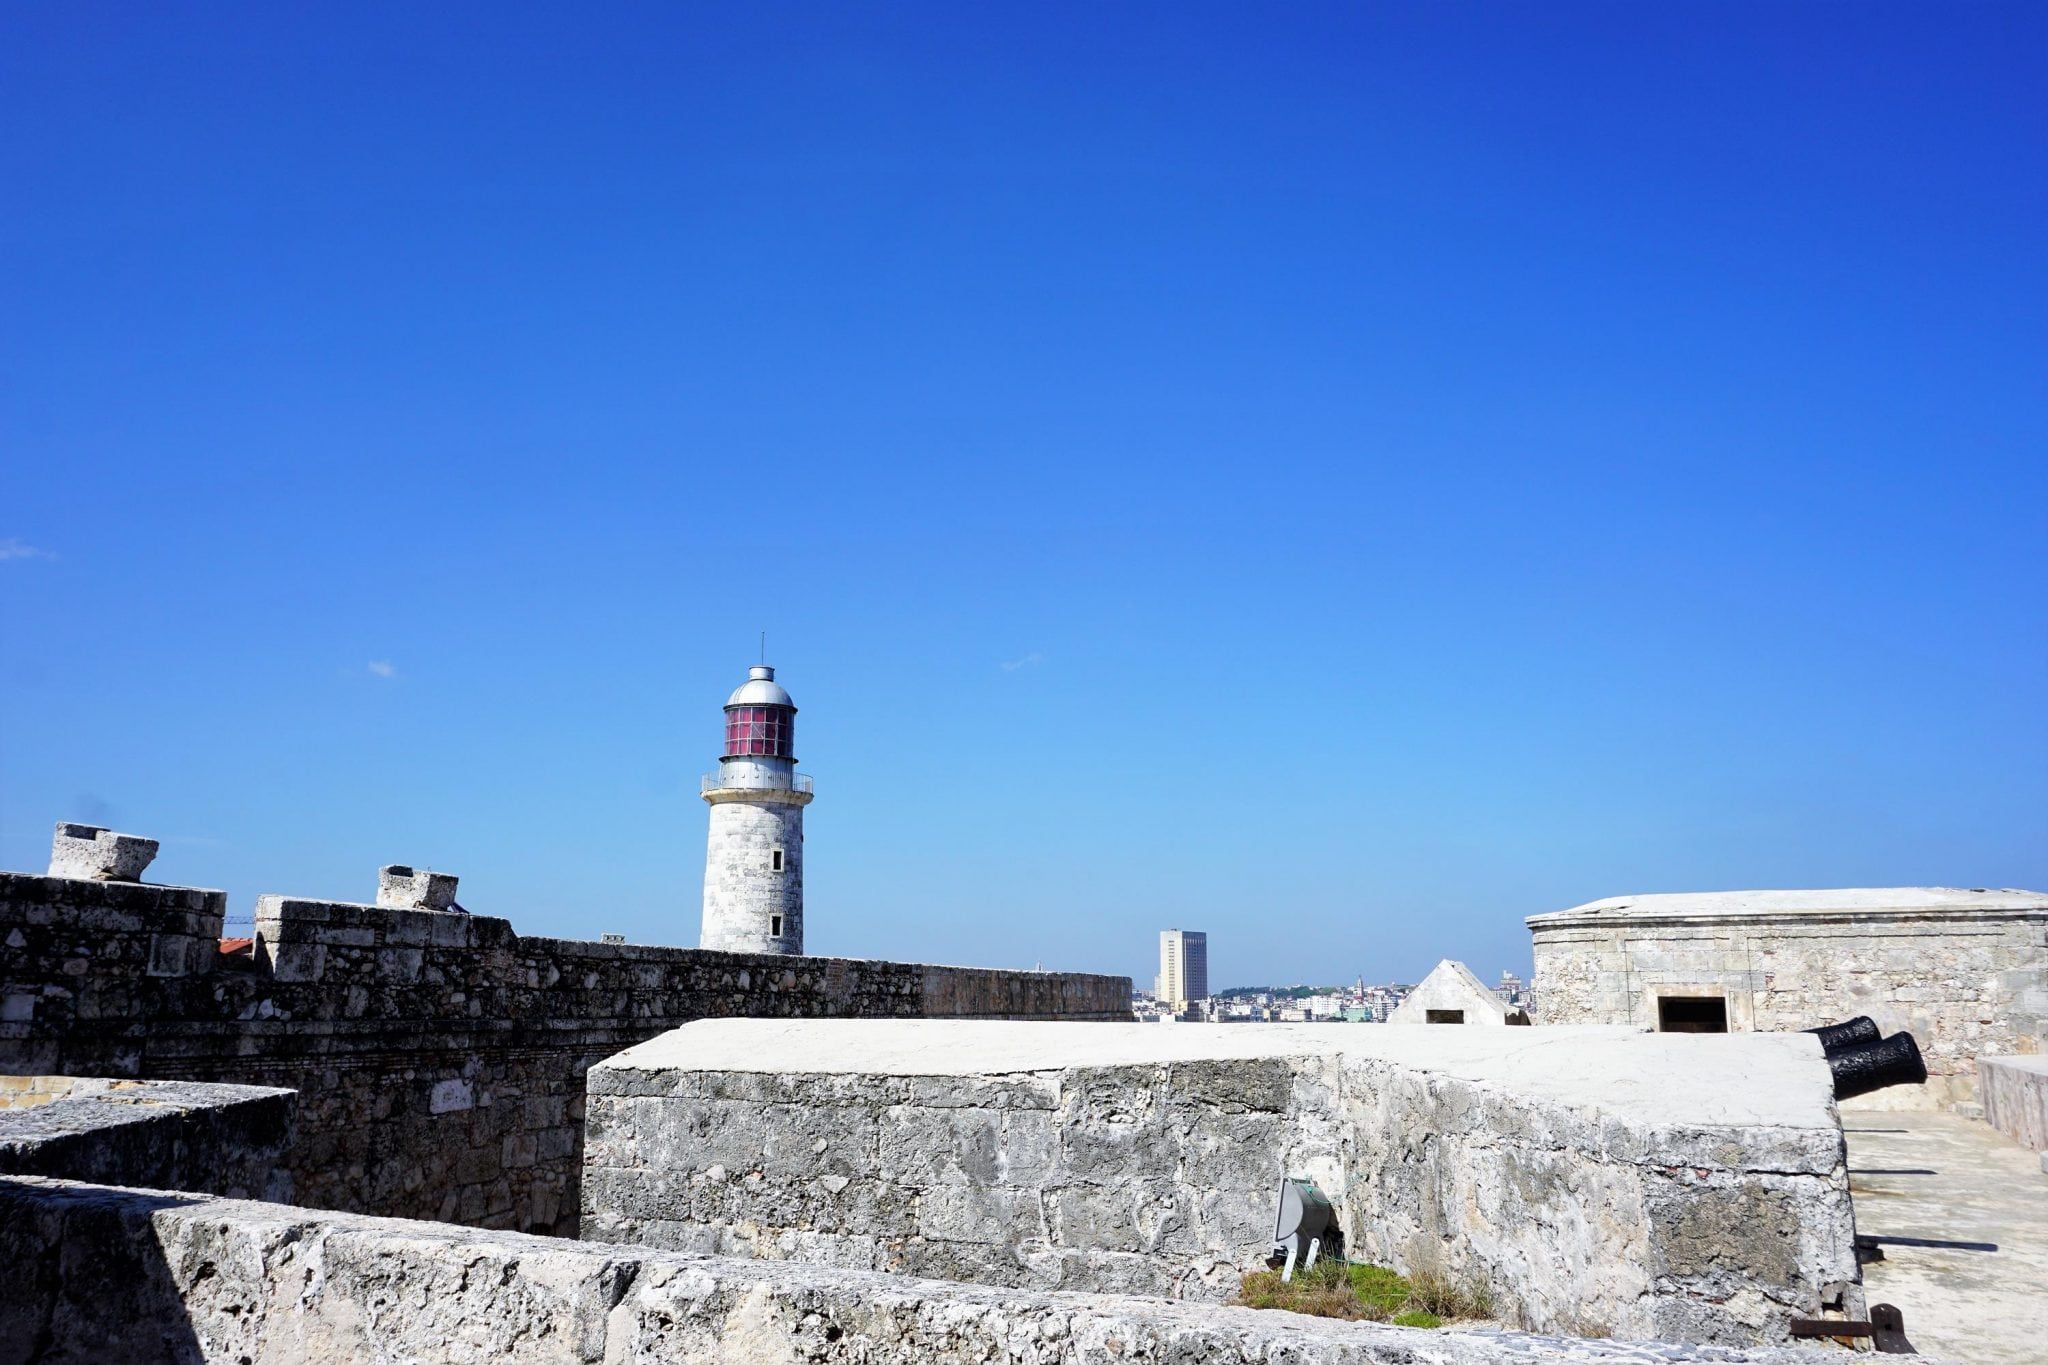 Touring the Historic Forts of Havana, Cuba